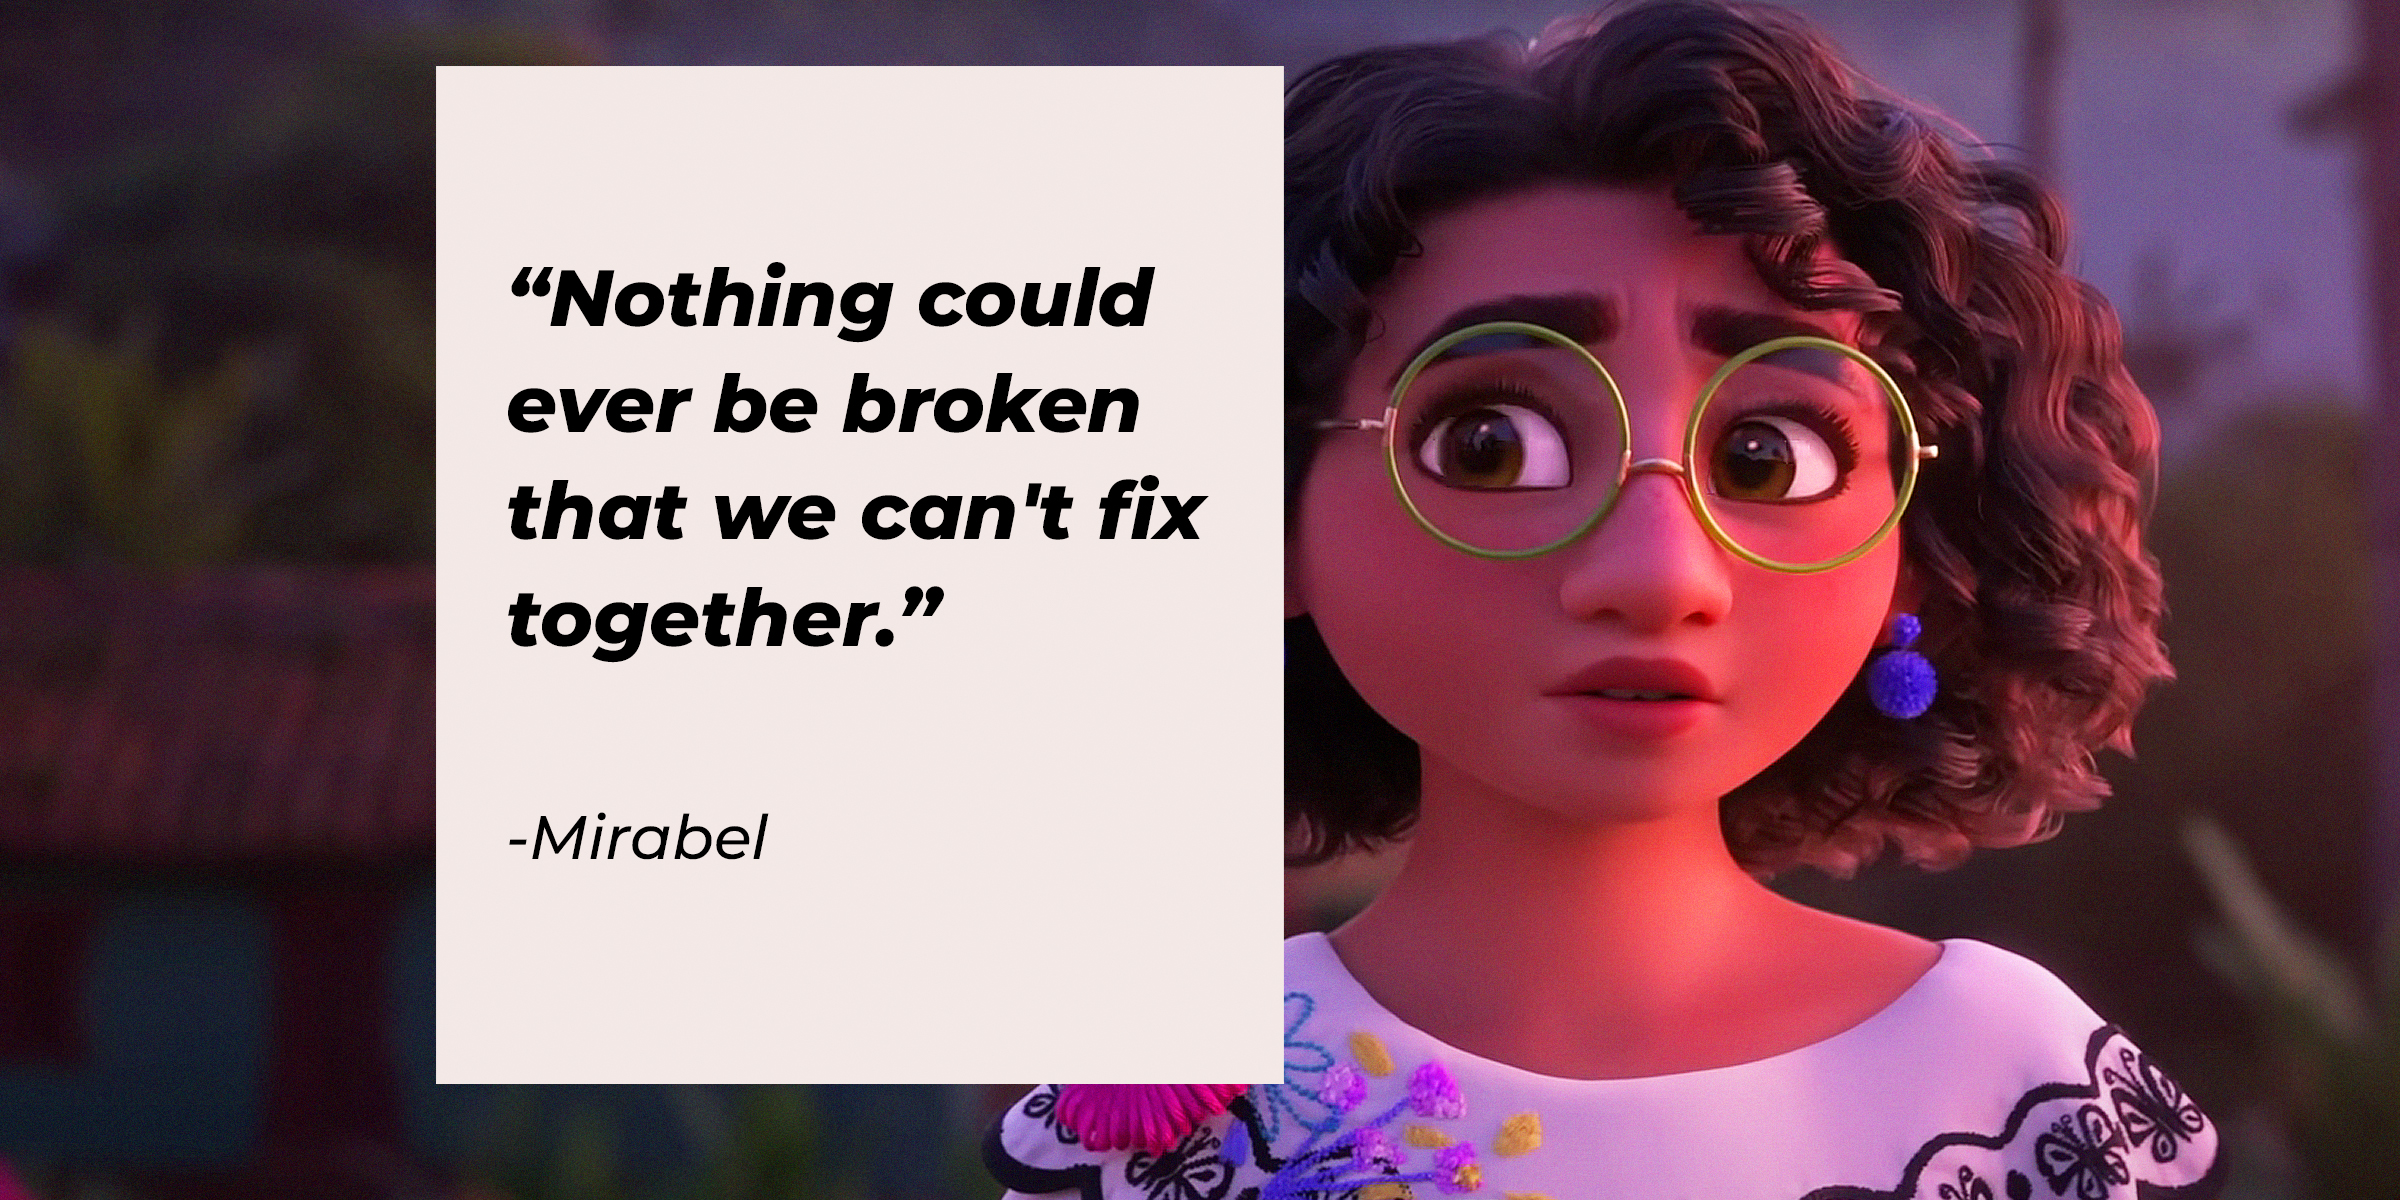 An image of Mirabel, with her quote: “Nothing could ever be broken that we can't fix together." | Source: Youtube.com/DisneyMusicVEVO